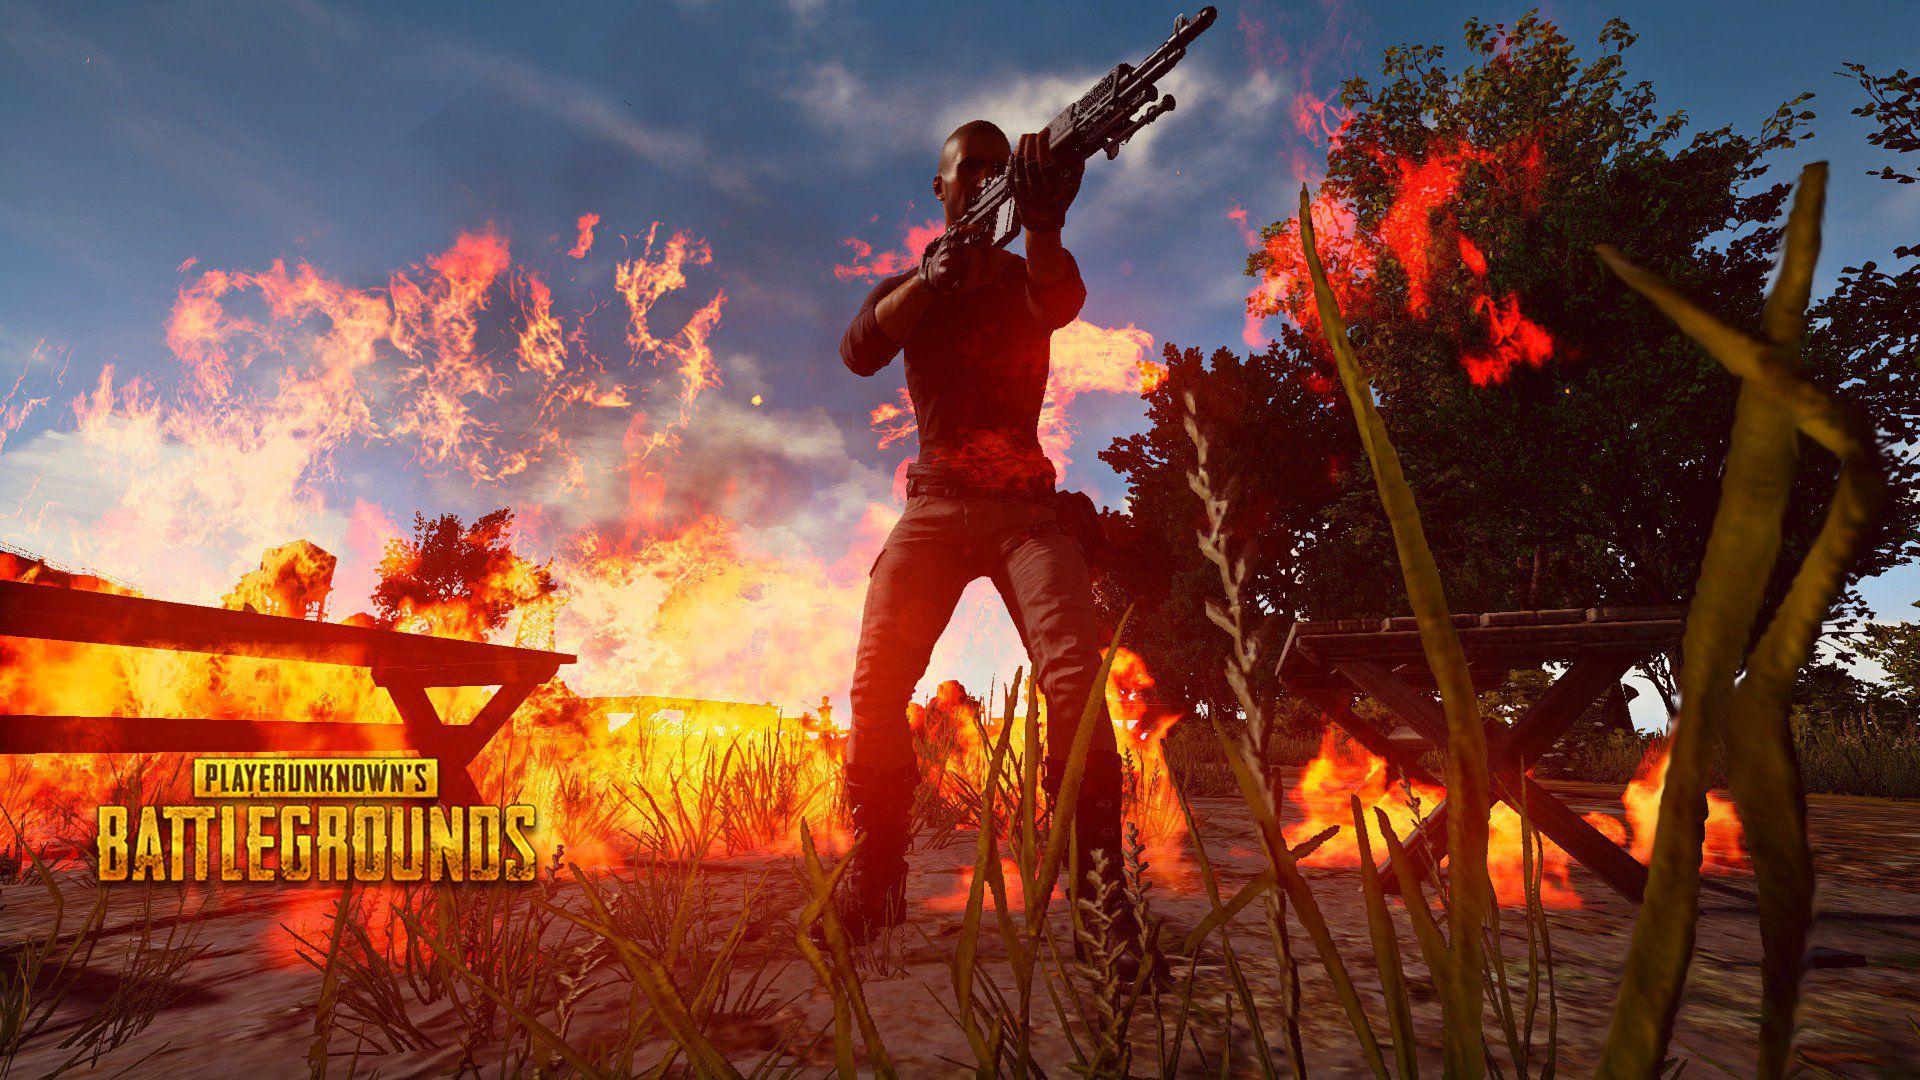 PlayerUnknown's Battlegrounds: PUBG Wallpapers and Photos 4K Full HD